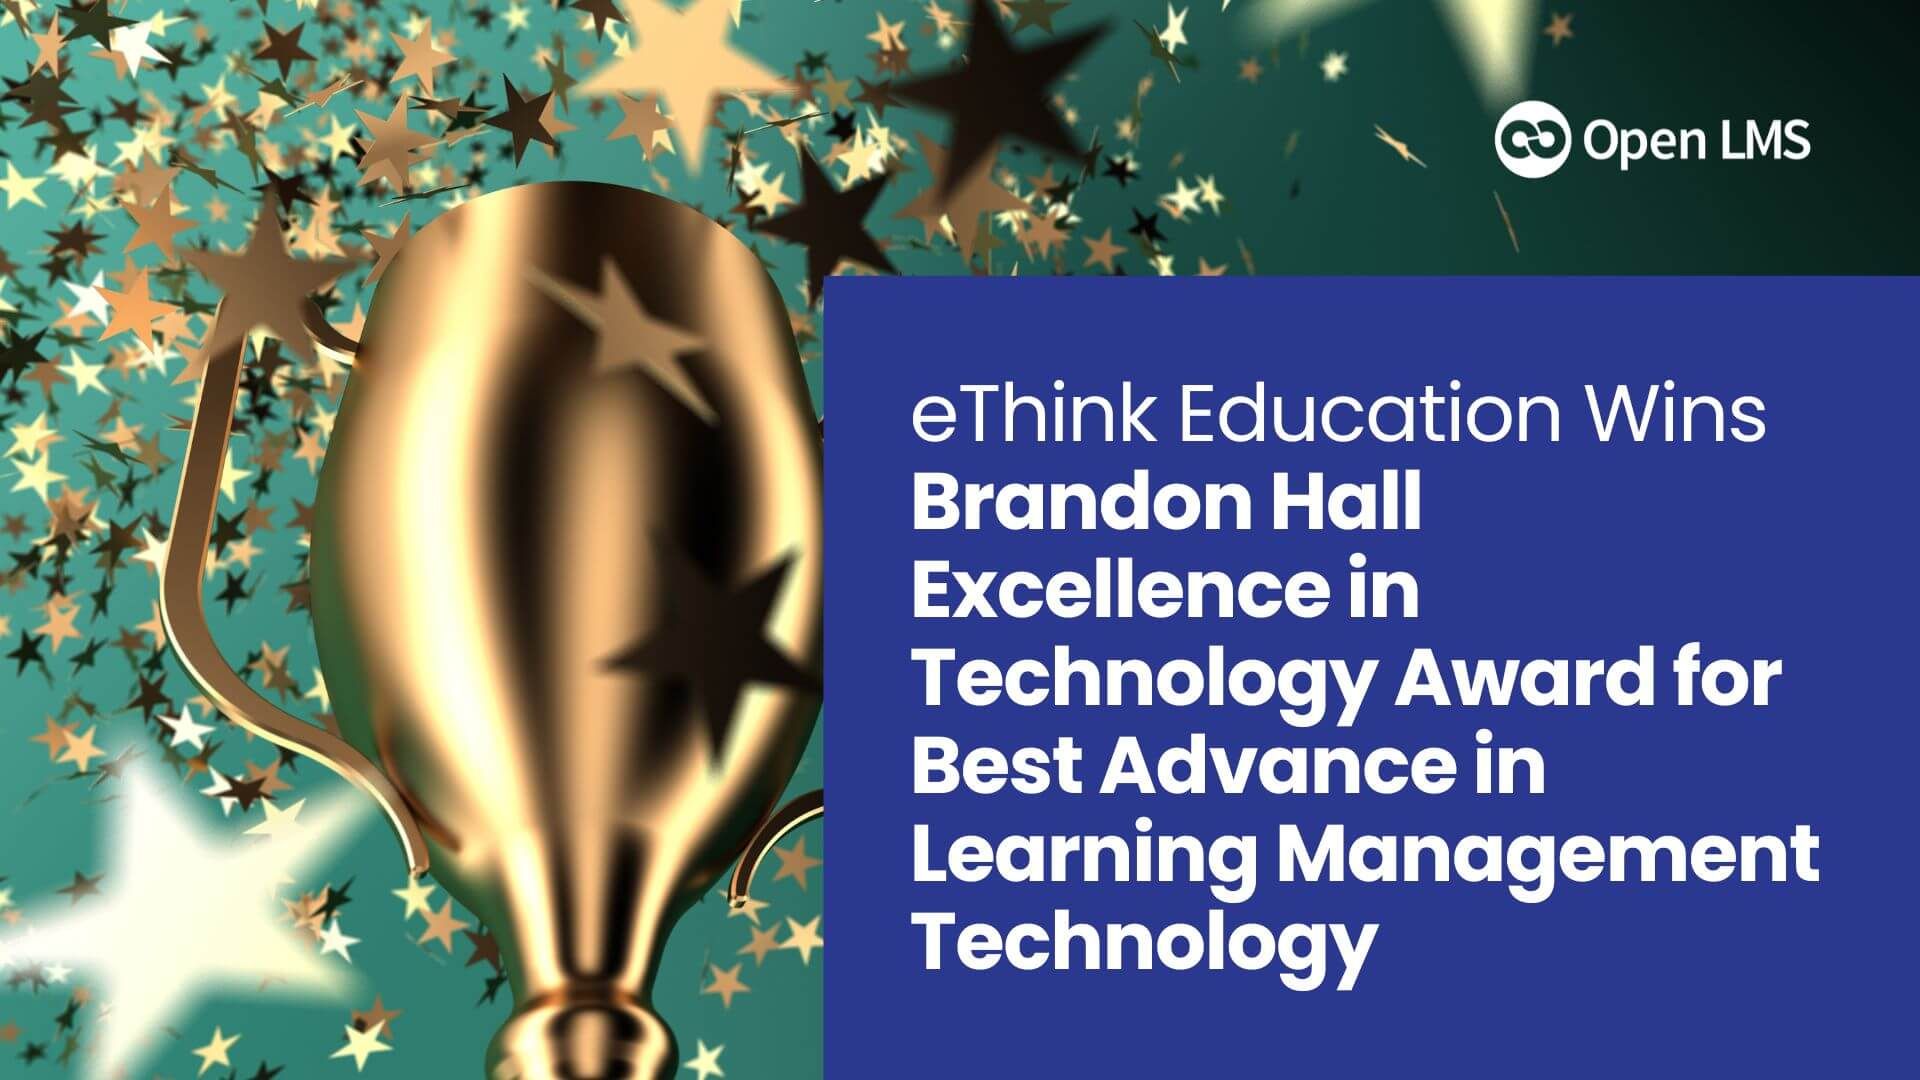 eThink Education Wins Brandon Hall Excellence in Technology Award for Best Advance in Learning Management Technology